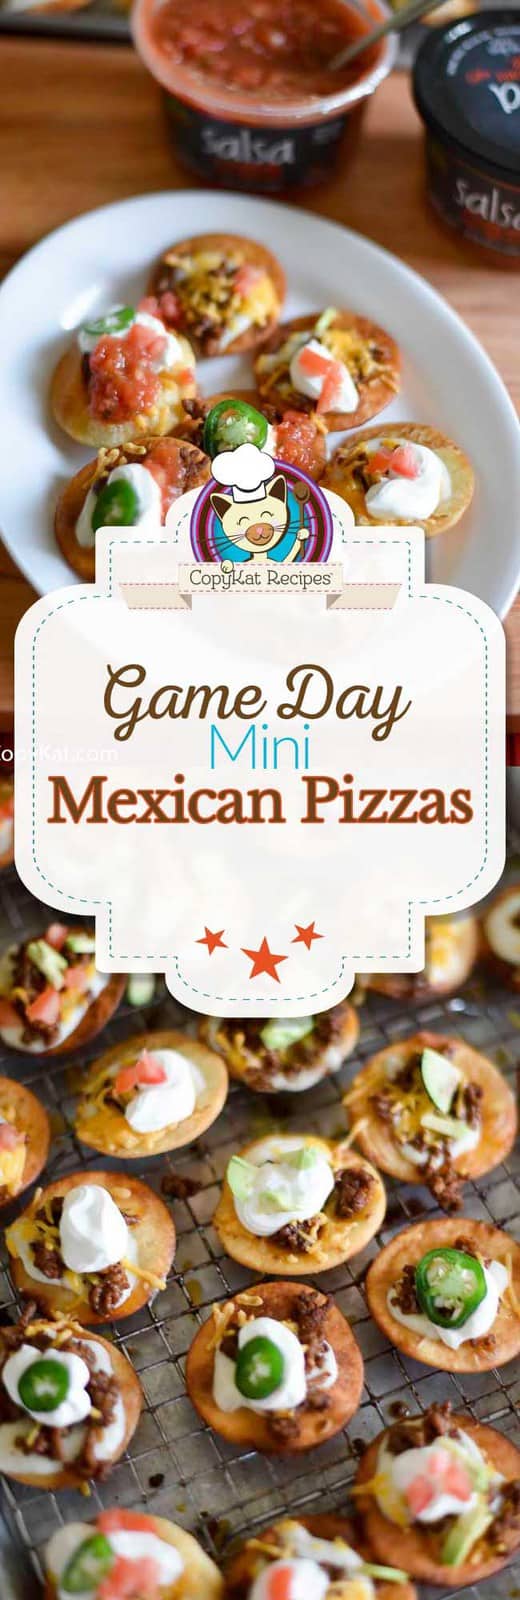 These Game Day Mini Mexican Pizzas are just the thing for your Big Game! Crispy mini Mexican pizzas topped your favorite ingredients. This is a recipe for your party!